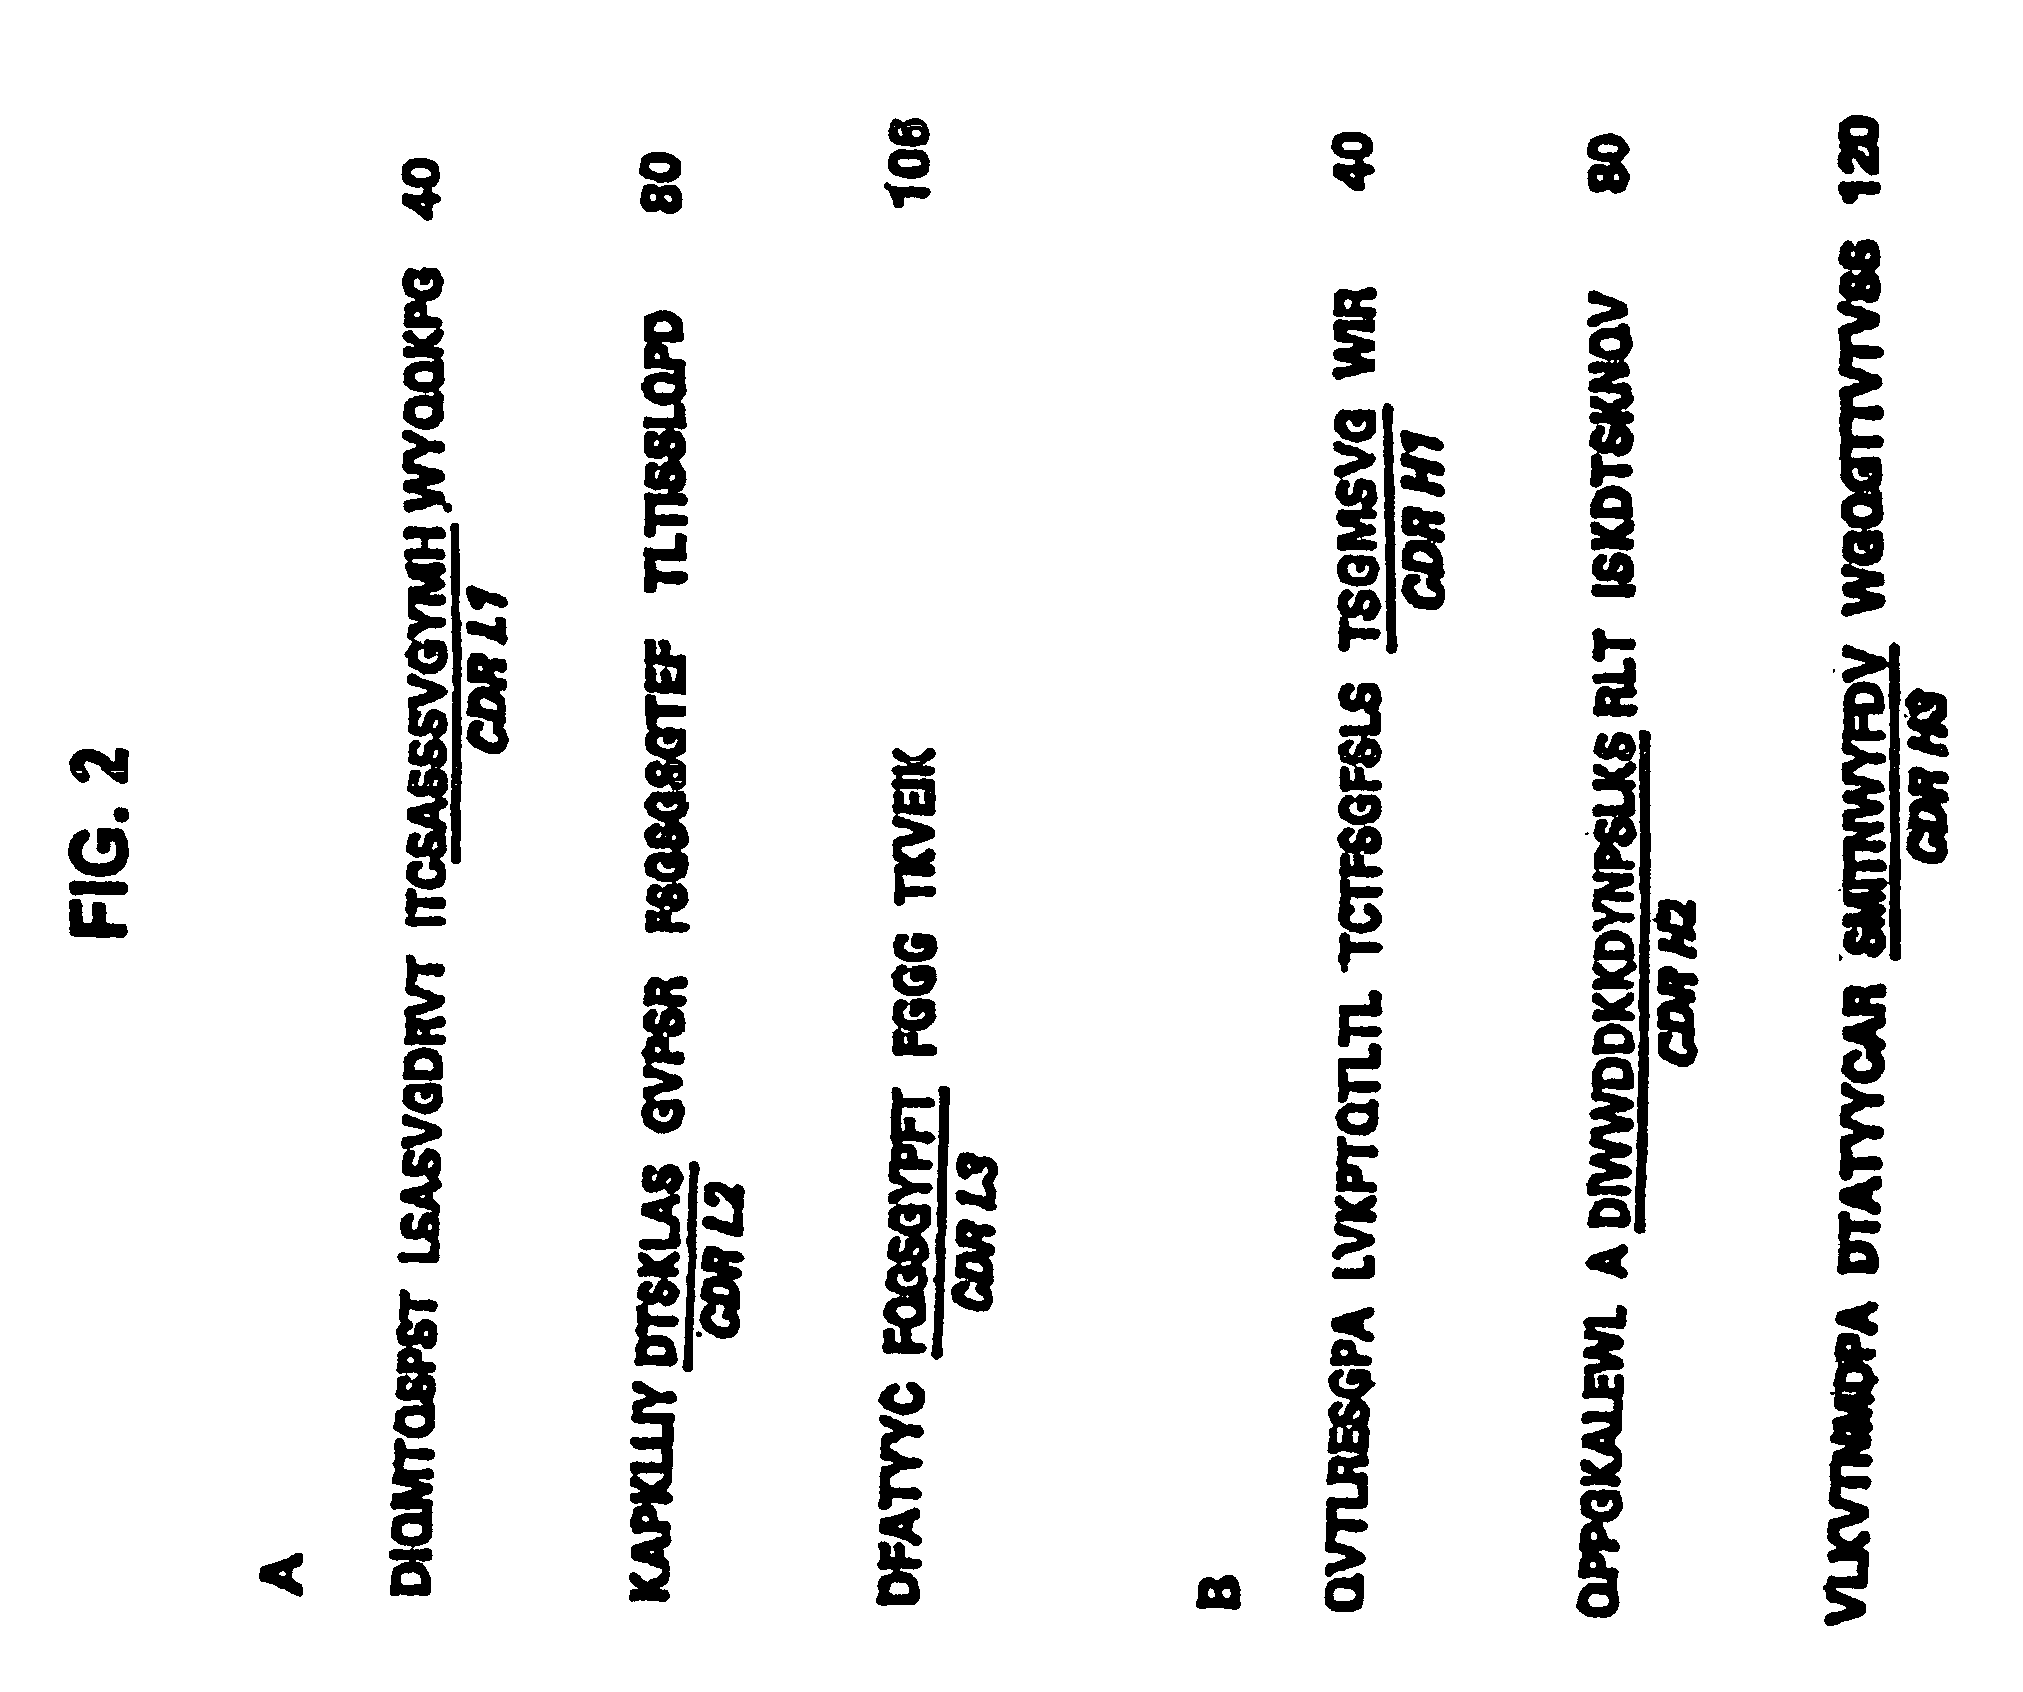 Methods of preventing and treating RSV infections and related conditions